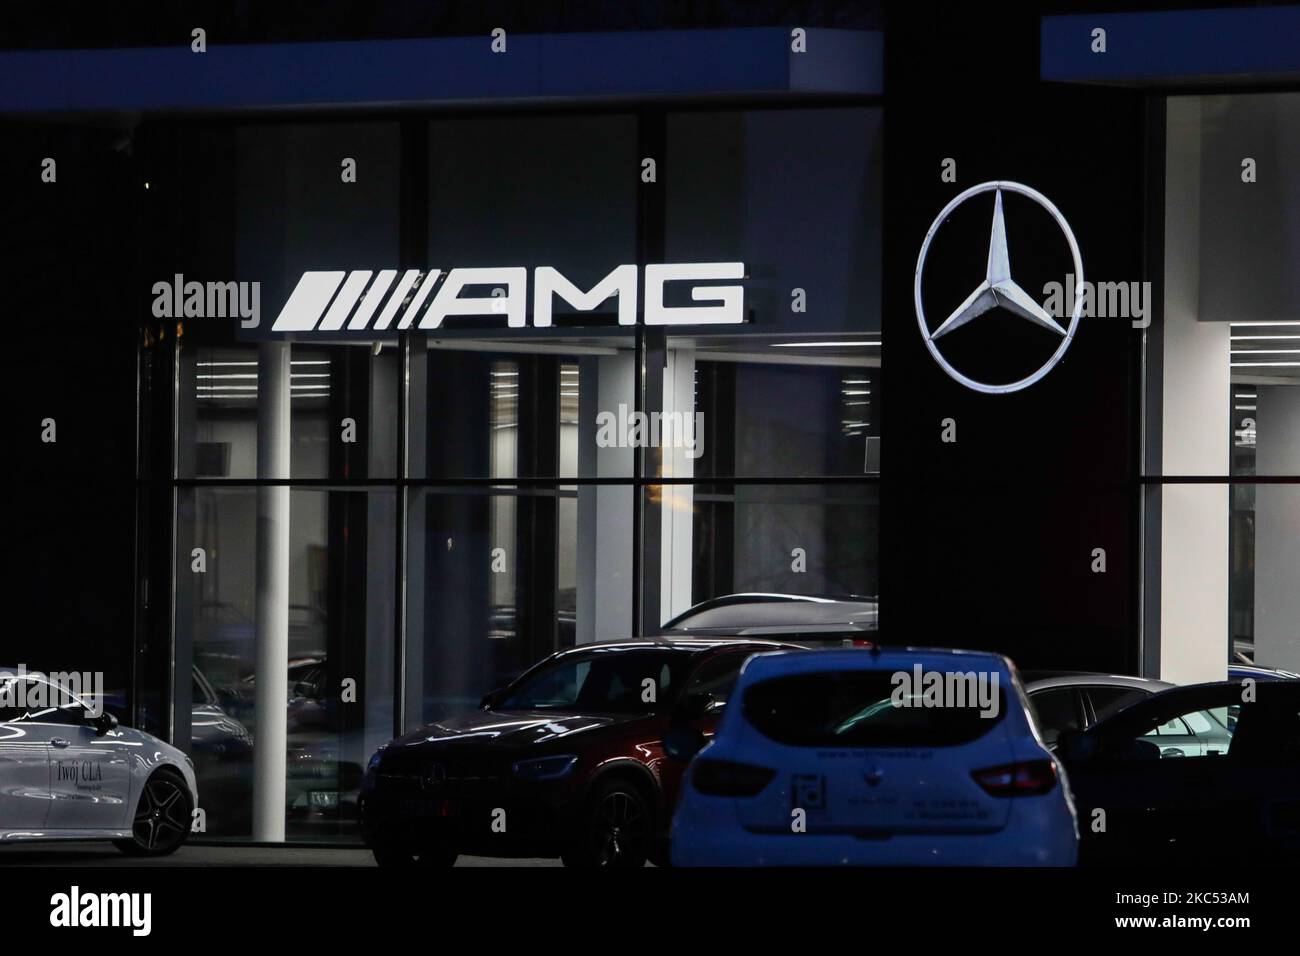 Amg logos hi-res stock photography and images - Alamy